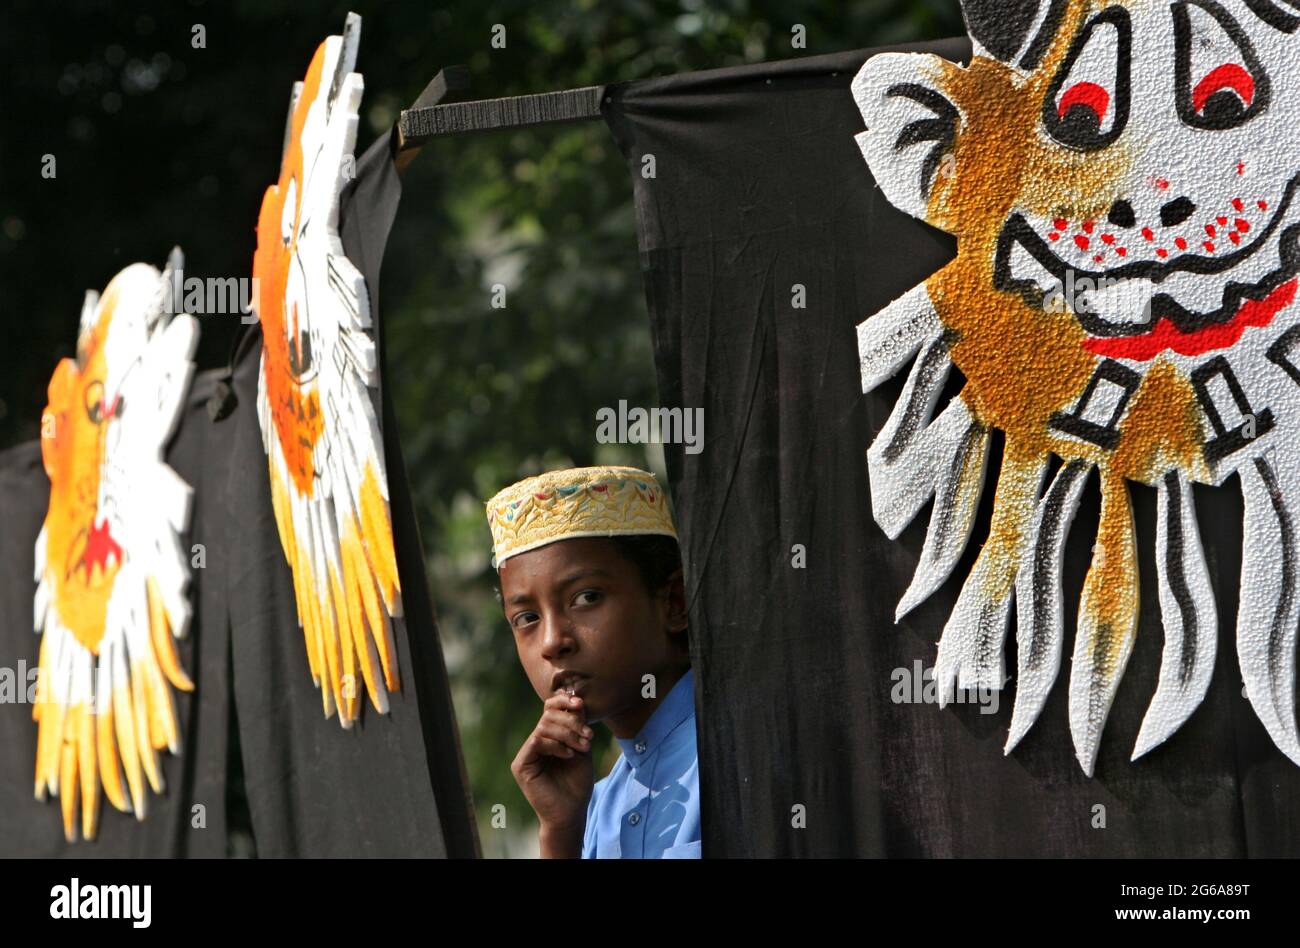 Bangladeshi boy  stand with symbolic banners of the war criminals of the Liberation war in 1971 against Pakistan, during the victory day at the central Shaheed Minar, Dhaka, Bangladesh 16 December 2007. The whole nation celebrates the 36th Bangladeshi boy stands with symbolic banners of the Liberation war criminals during the victory day at the central Shaheed Minar, Dhaka, Bangladesh. December 16, 2007. The whole nation celebrates the 36th victory anniversary over Pakistani occupation forces with the demand for trial of the war criminals across the country. Stock Photo